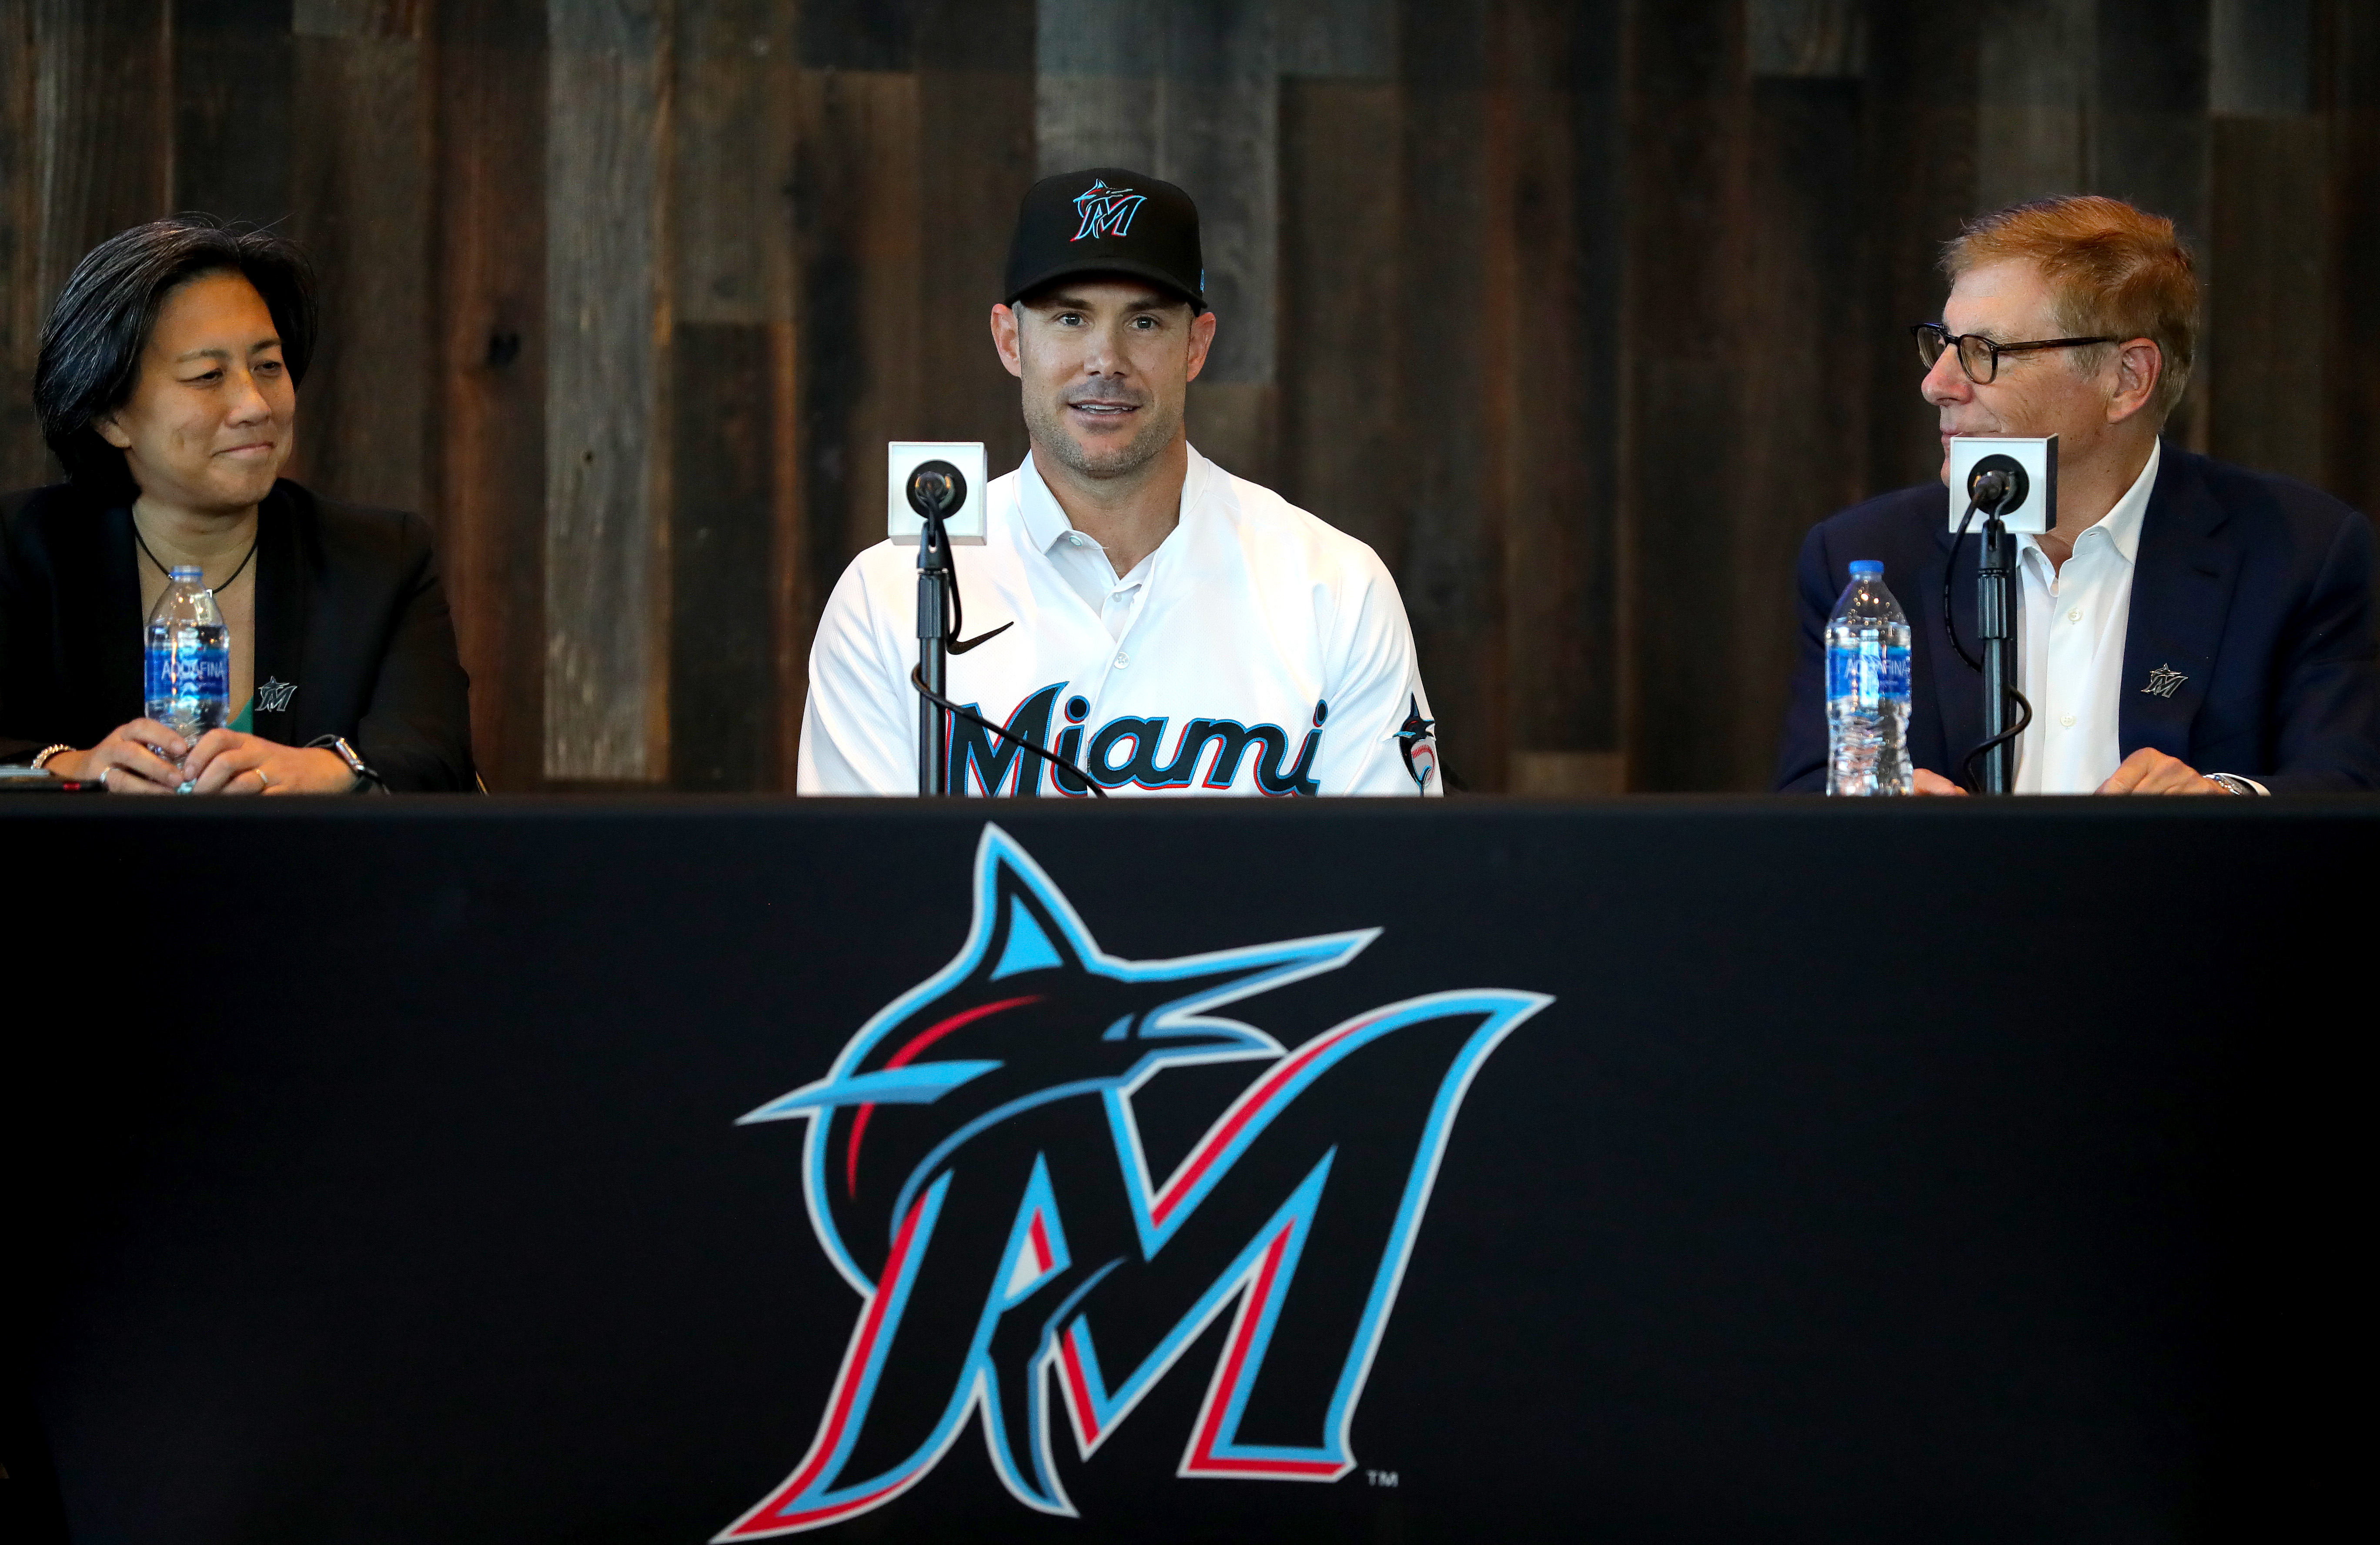 General manager Kim Ng, manager Skip Schumaker, and owner Bruce Sherman of the Miami Marlins speak to the media during a press conference at loanDepot park on November 03, 2022 in Miami, Florida.